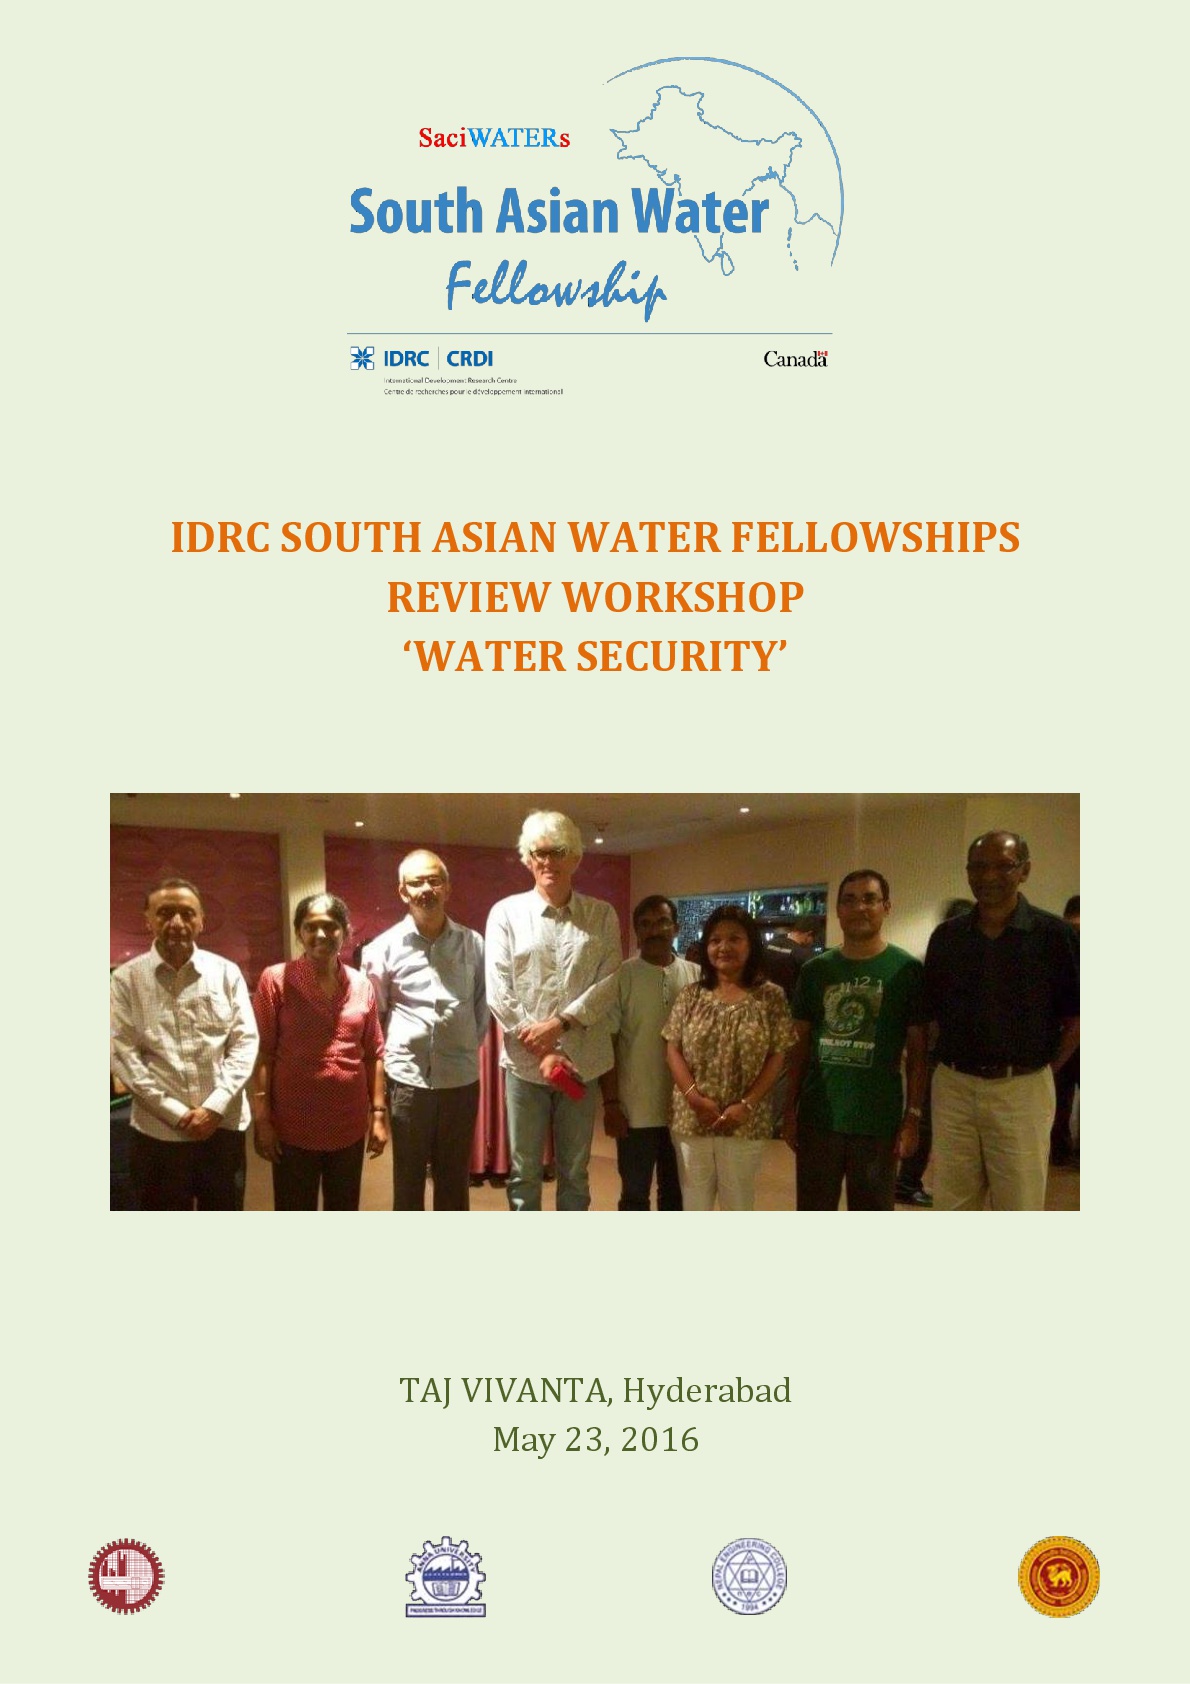 IDRC SOUTH ASIAN WATER FELLOWSHIPS REVIEW WORKSHOP ‘WATER SECURITY’